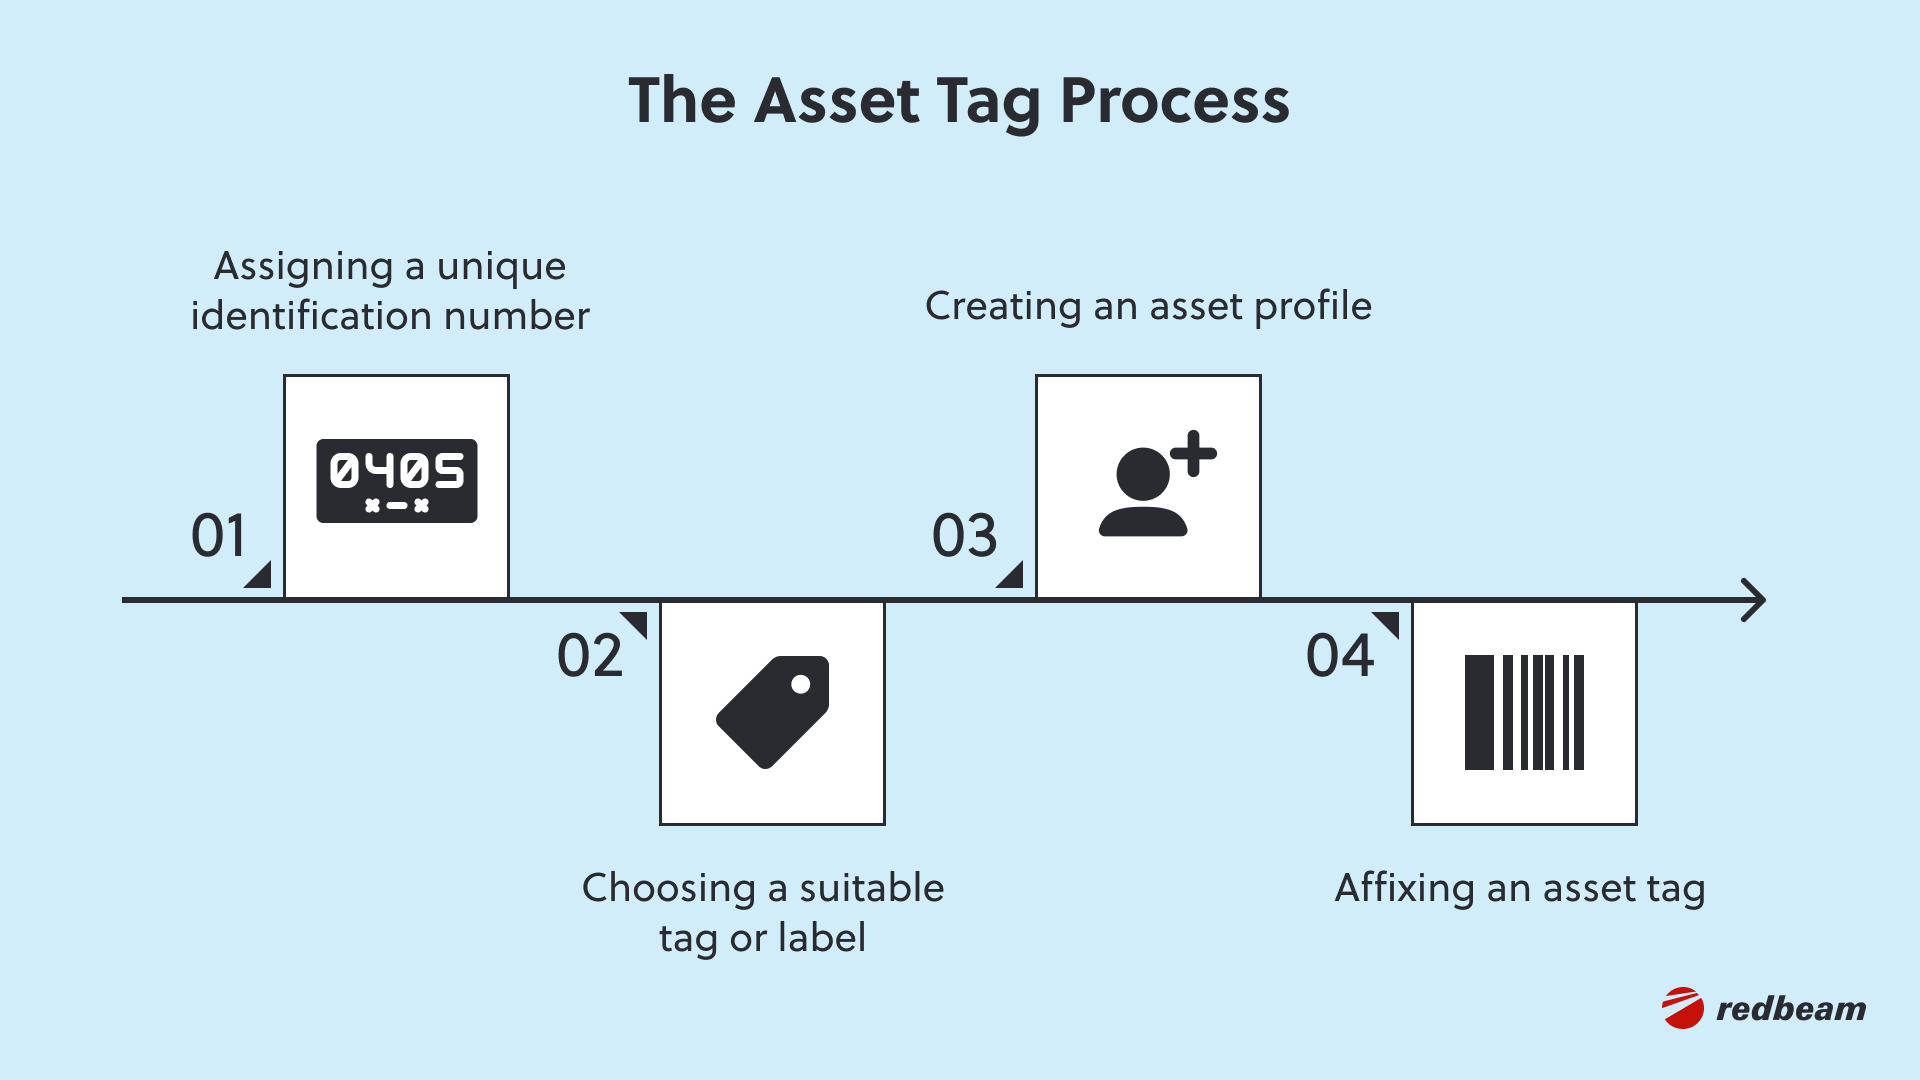 4.The Asset Tag Process